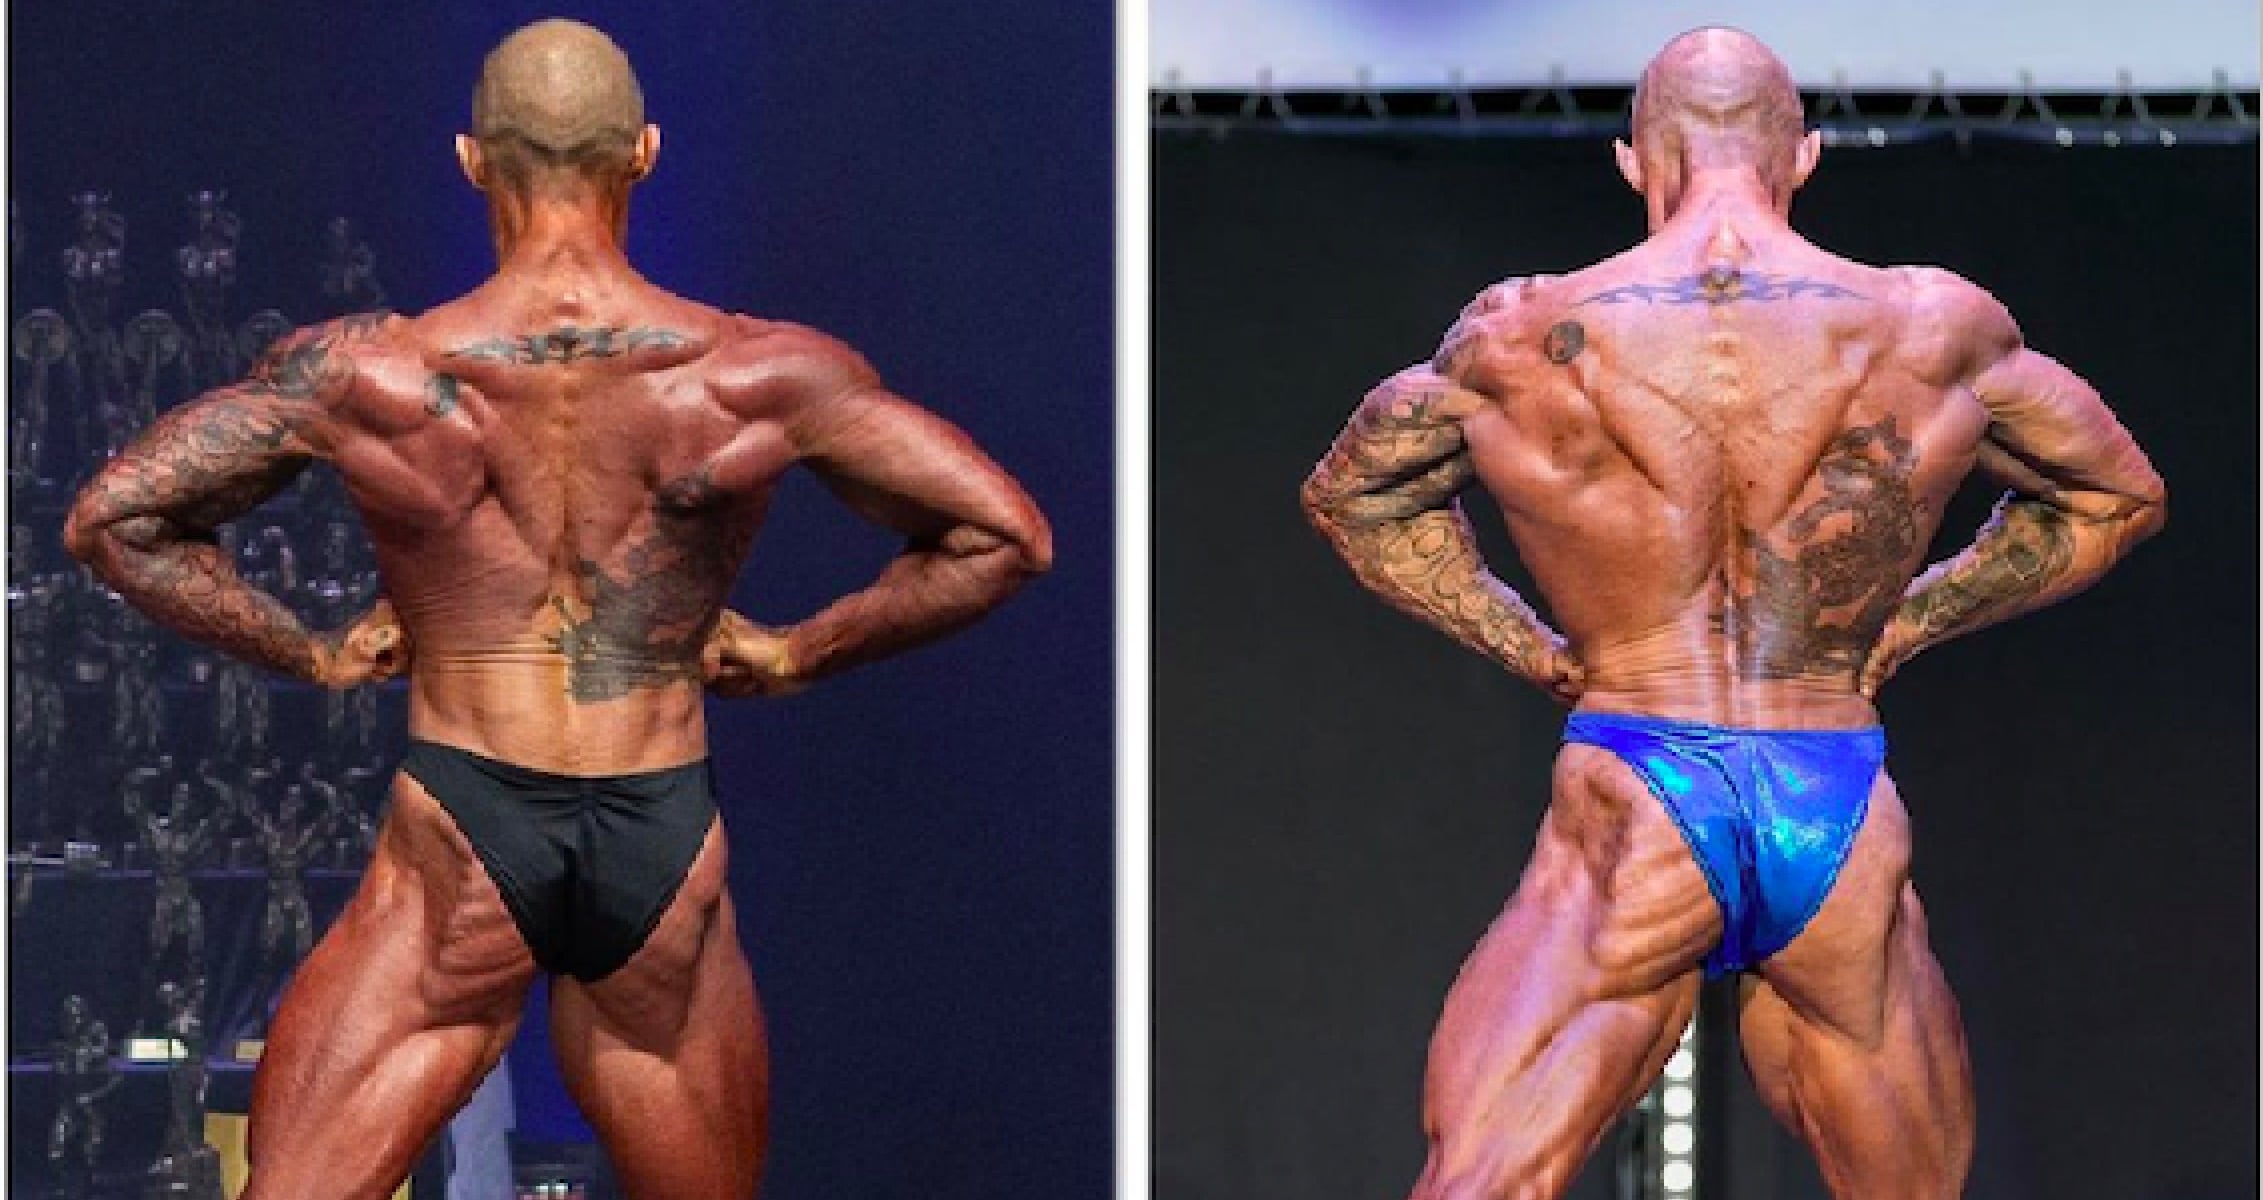 British Natural Bodybuilding Champion Shows Off Jaw-dropping